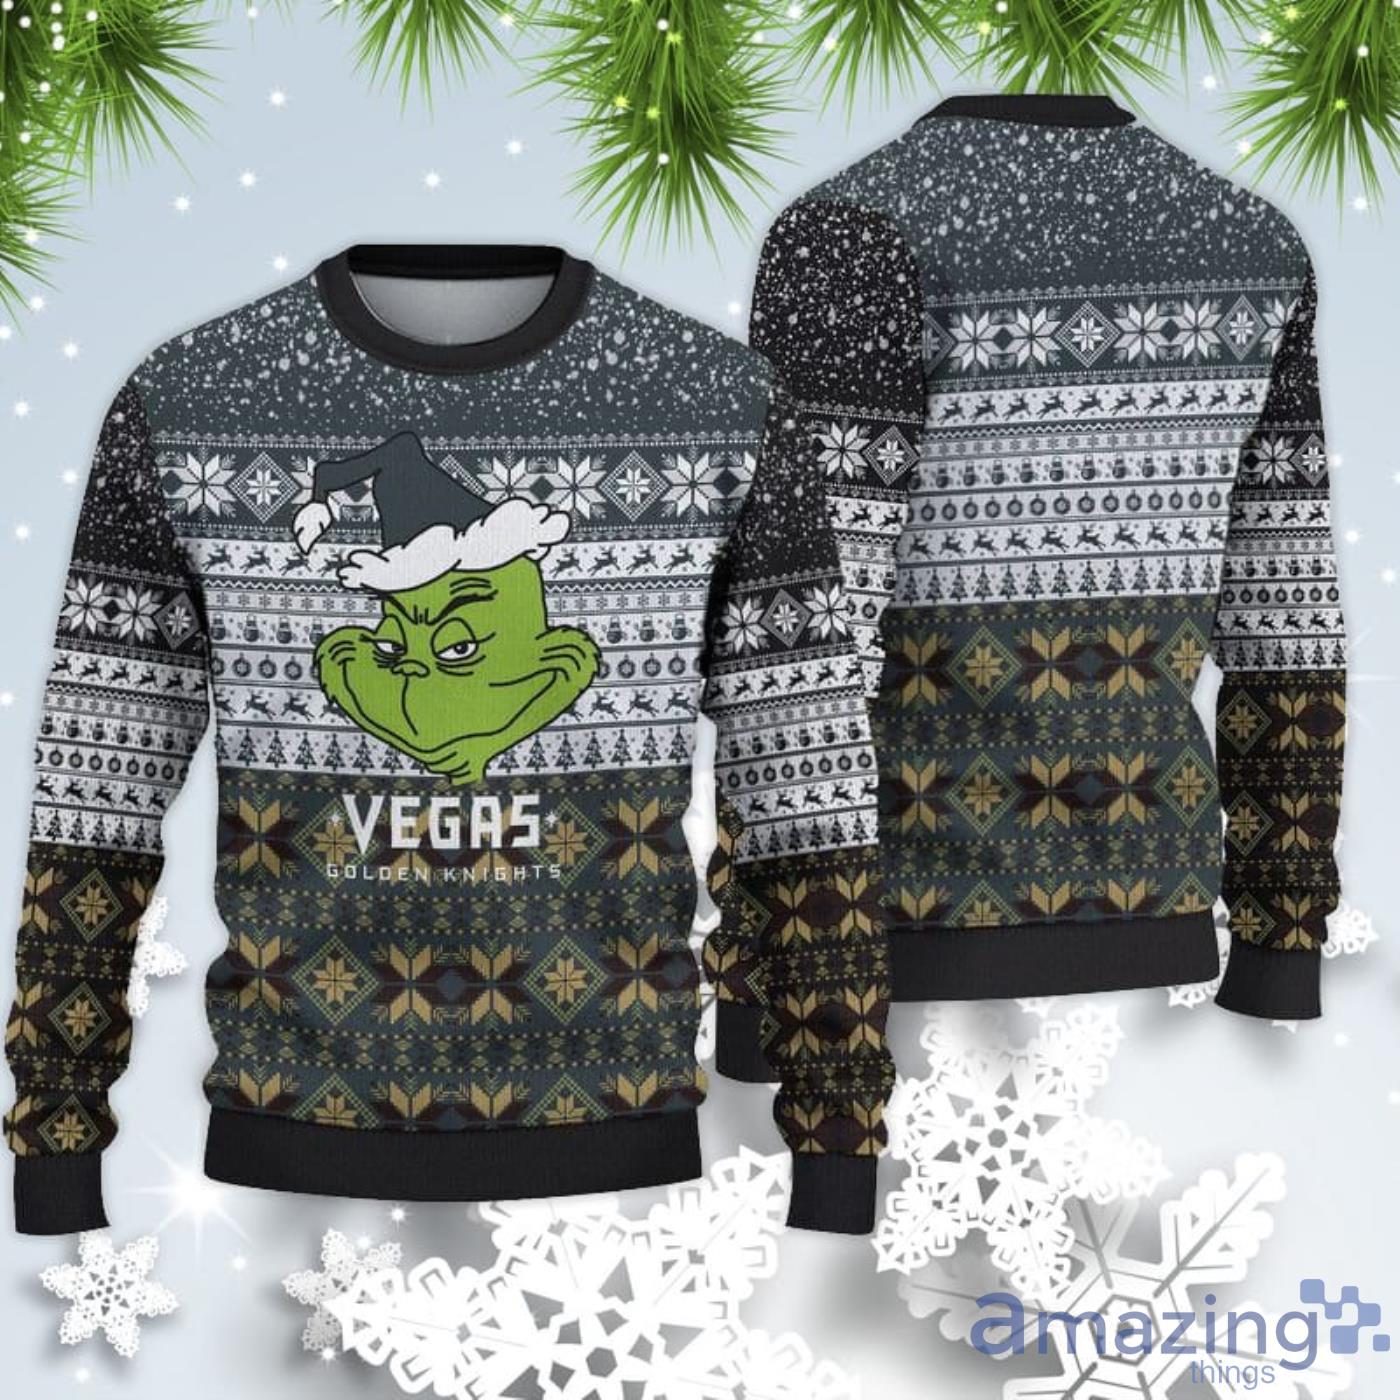 Vegas Golden Knights Christmas Grinch Sweater For Fans Product Photo 1